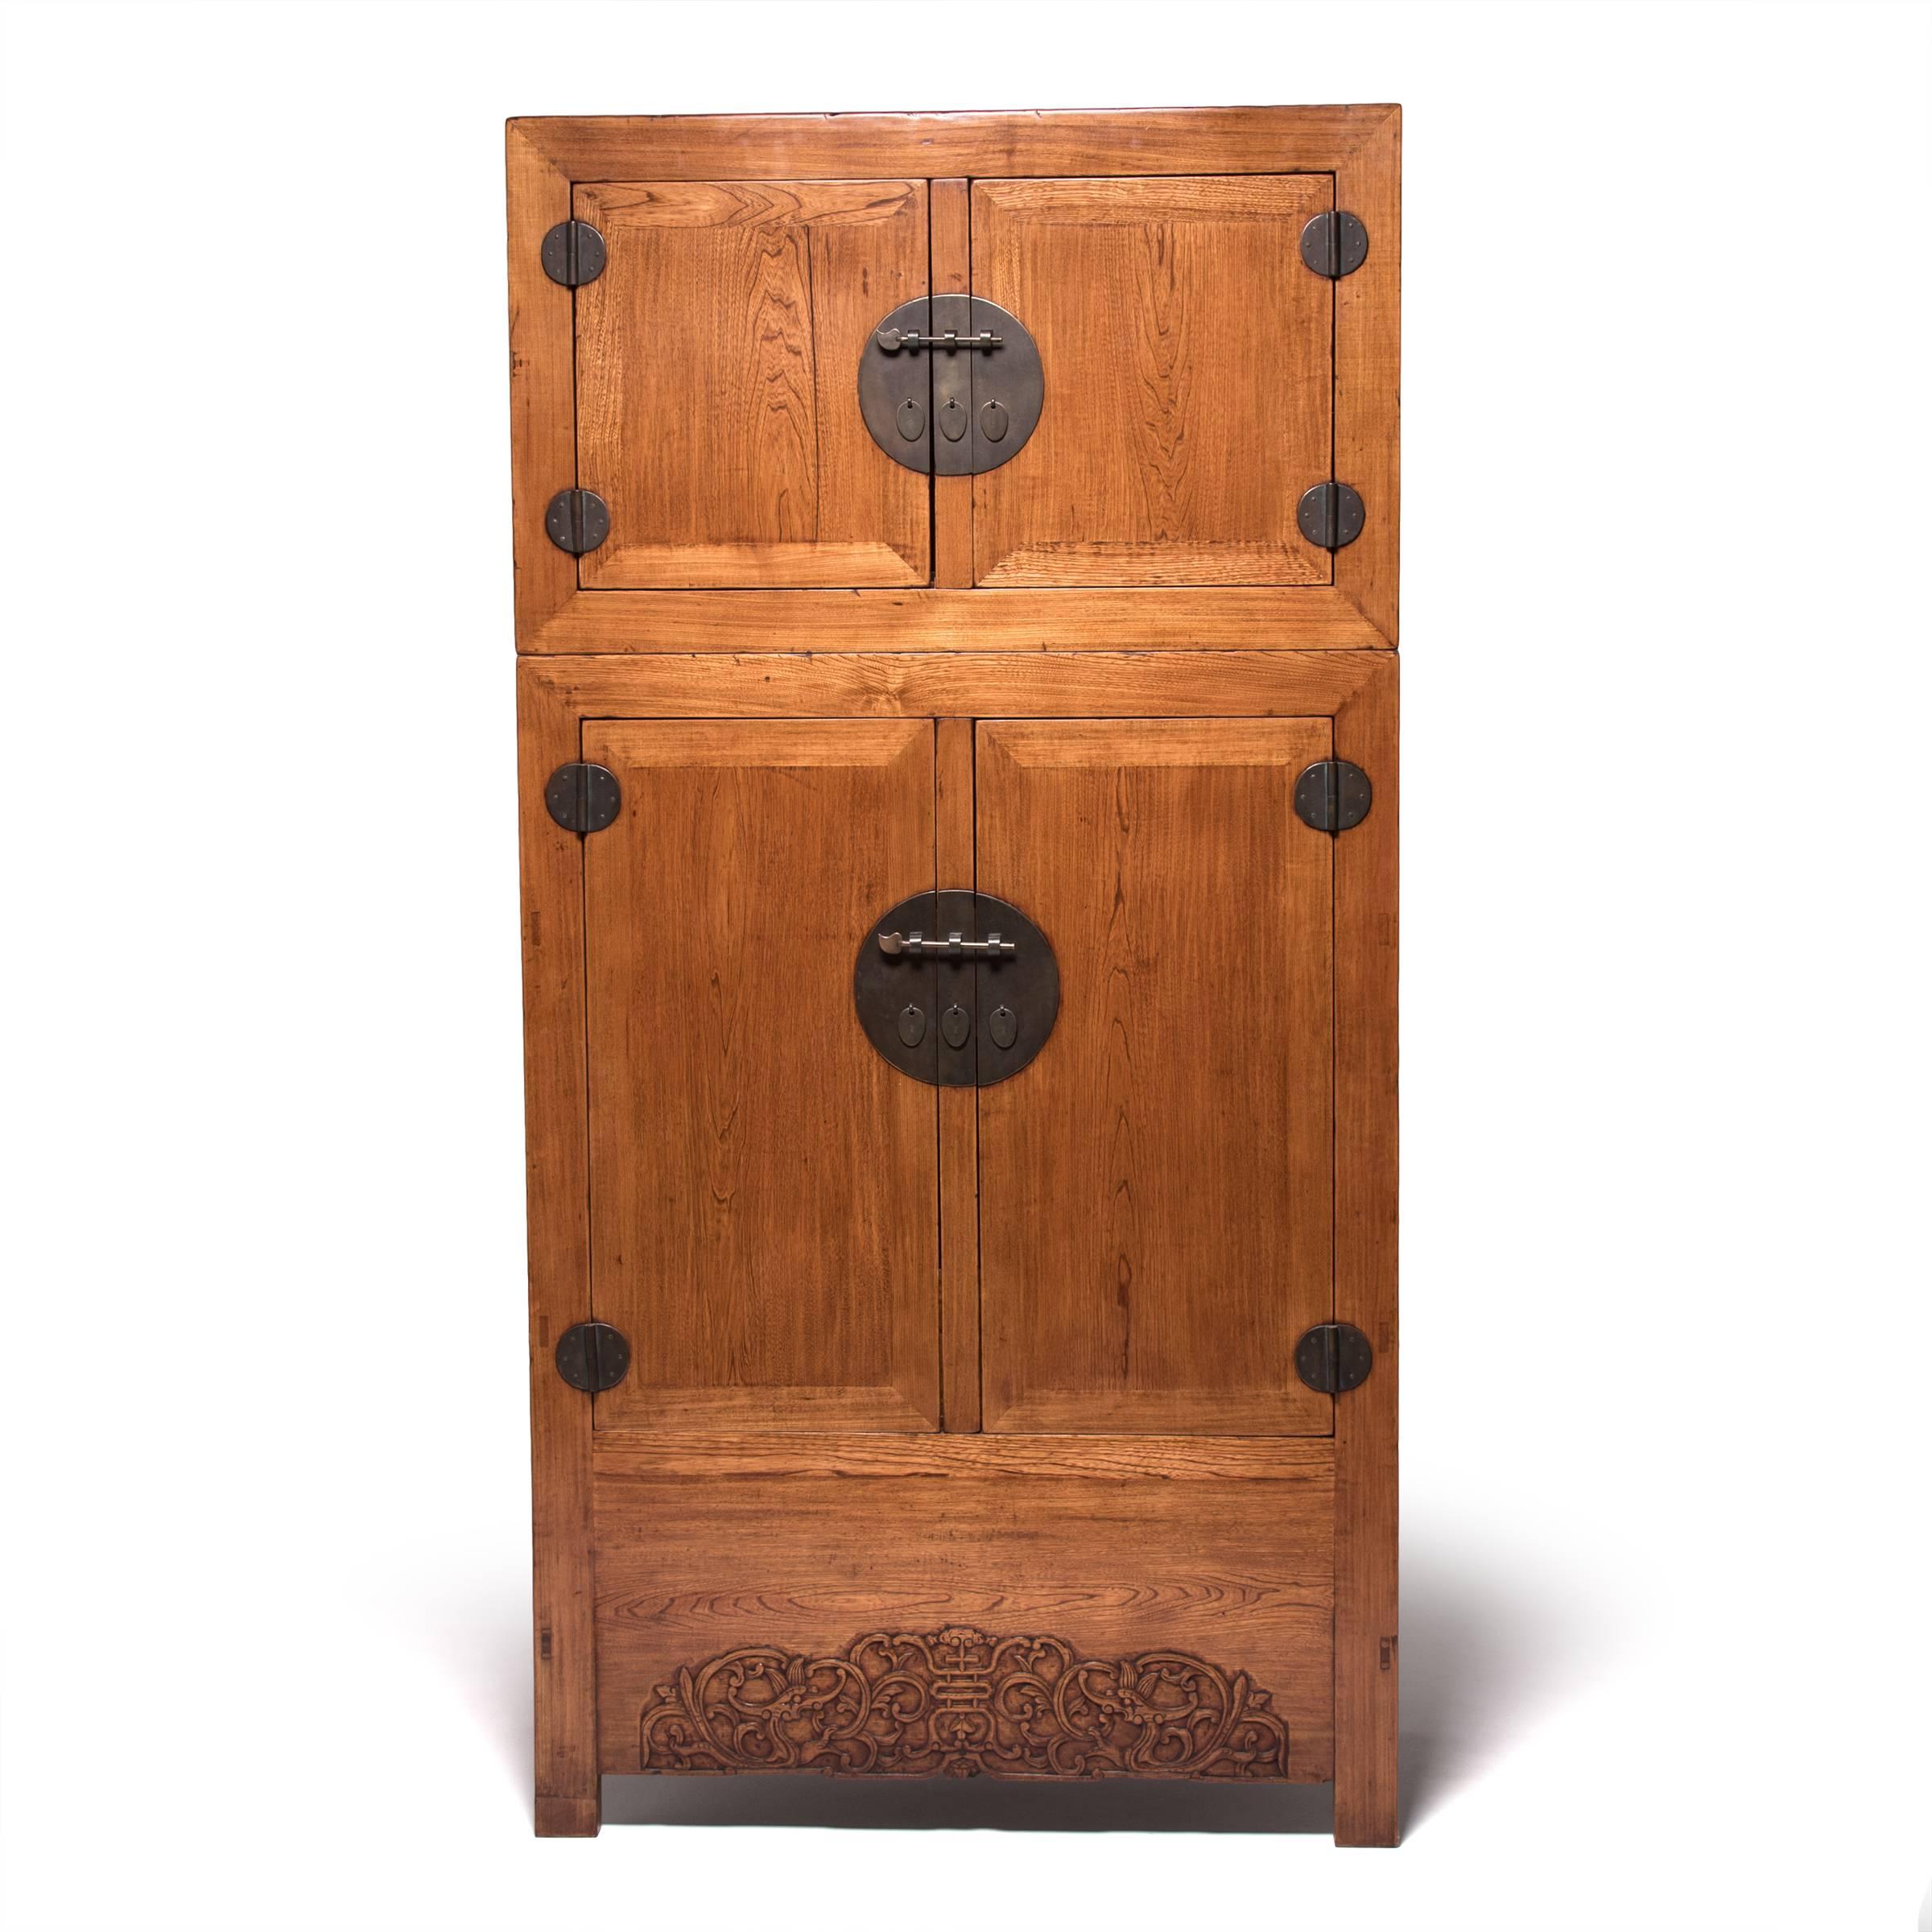 Likely to have been the centerpiece of a wealthy gentleman’s home, this pair of Qing-dynasty compound cabinets are actually comprised of two stacked storage compartments. The upper compartment was traditionally used for hats or out of-season clothes